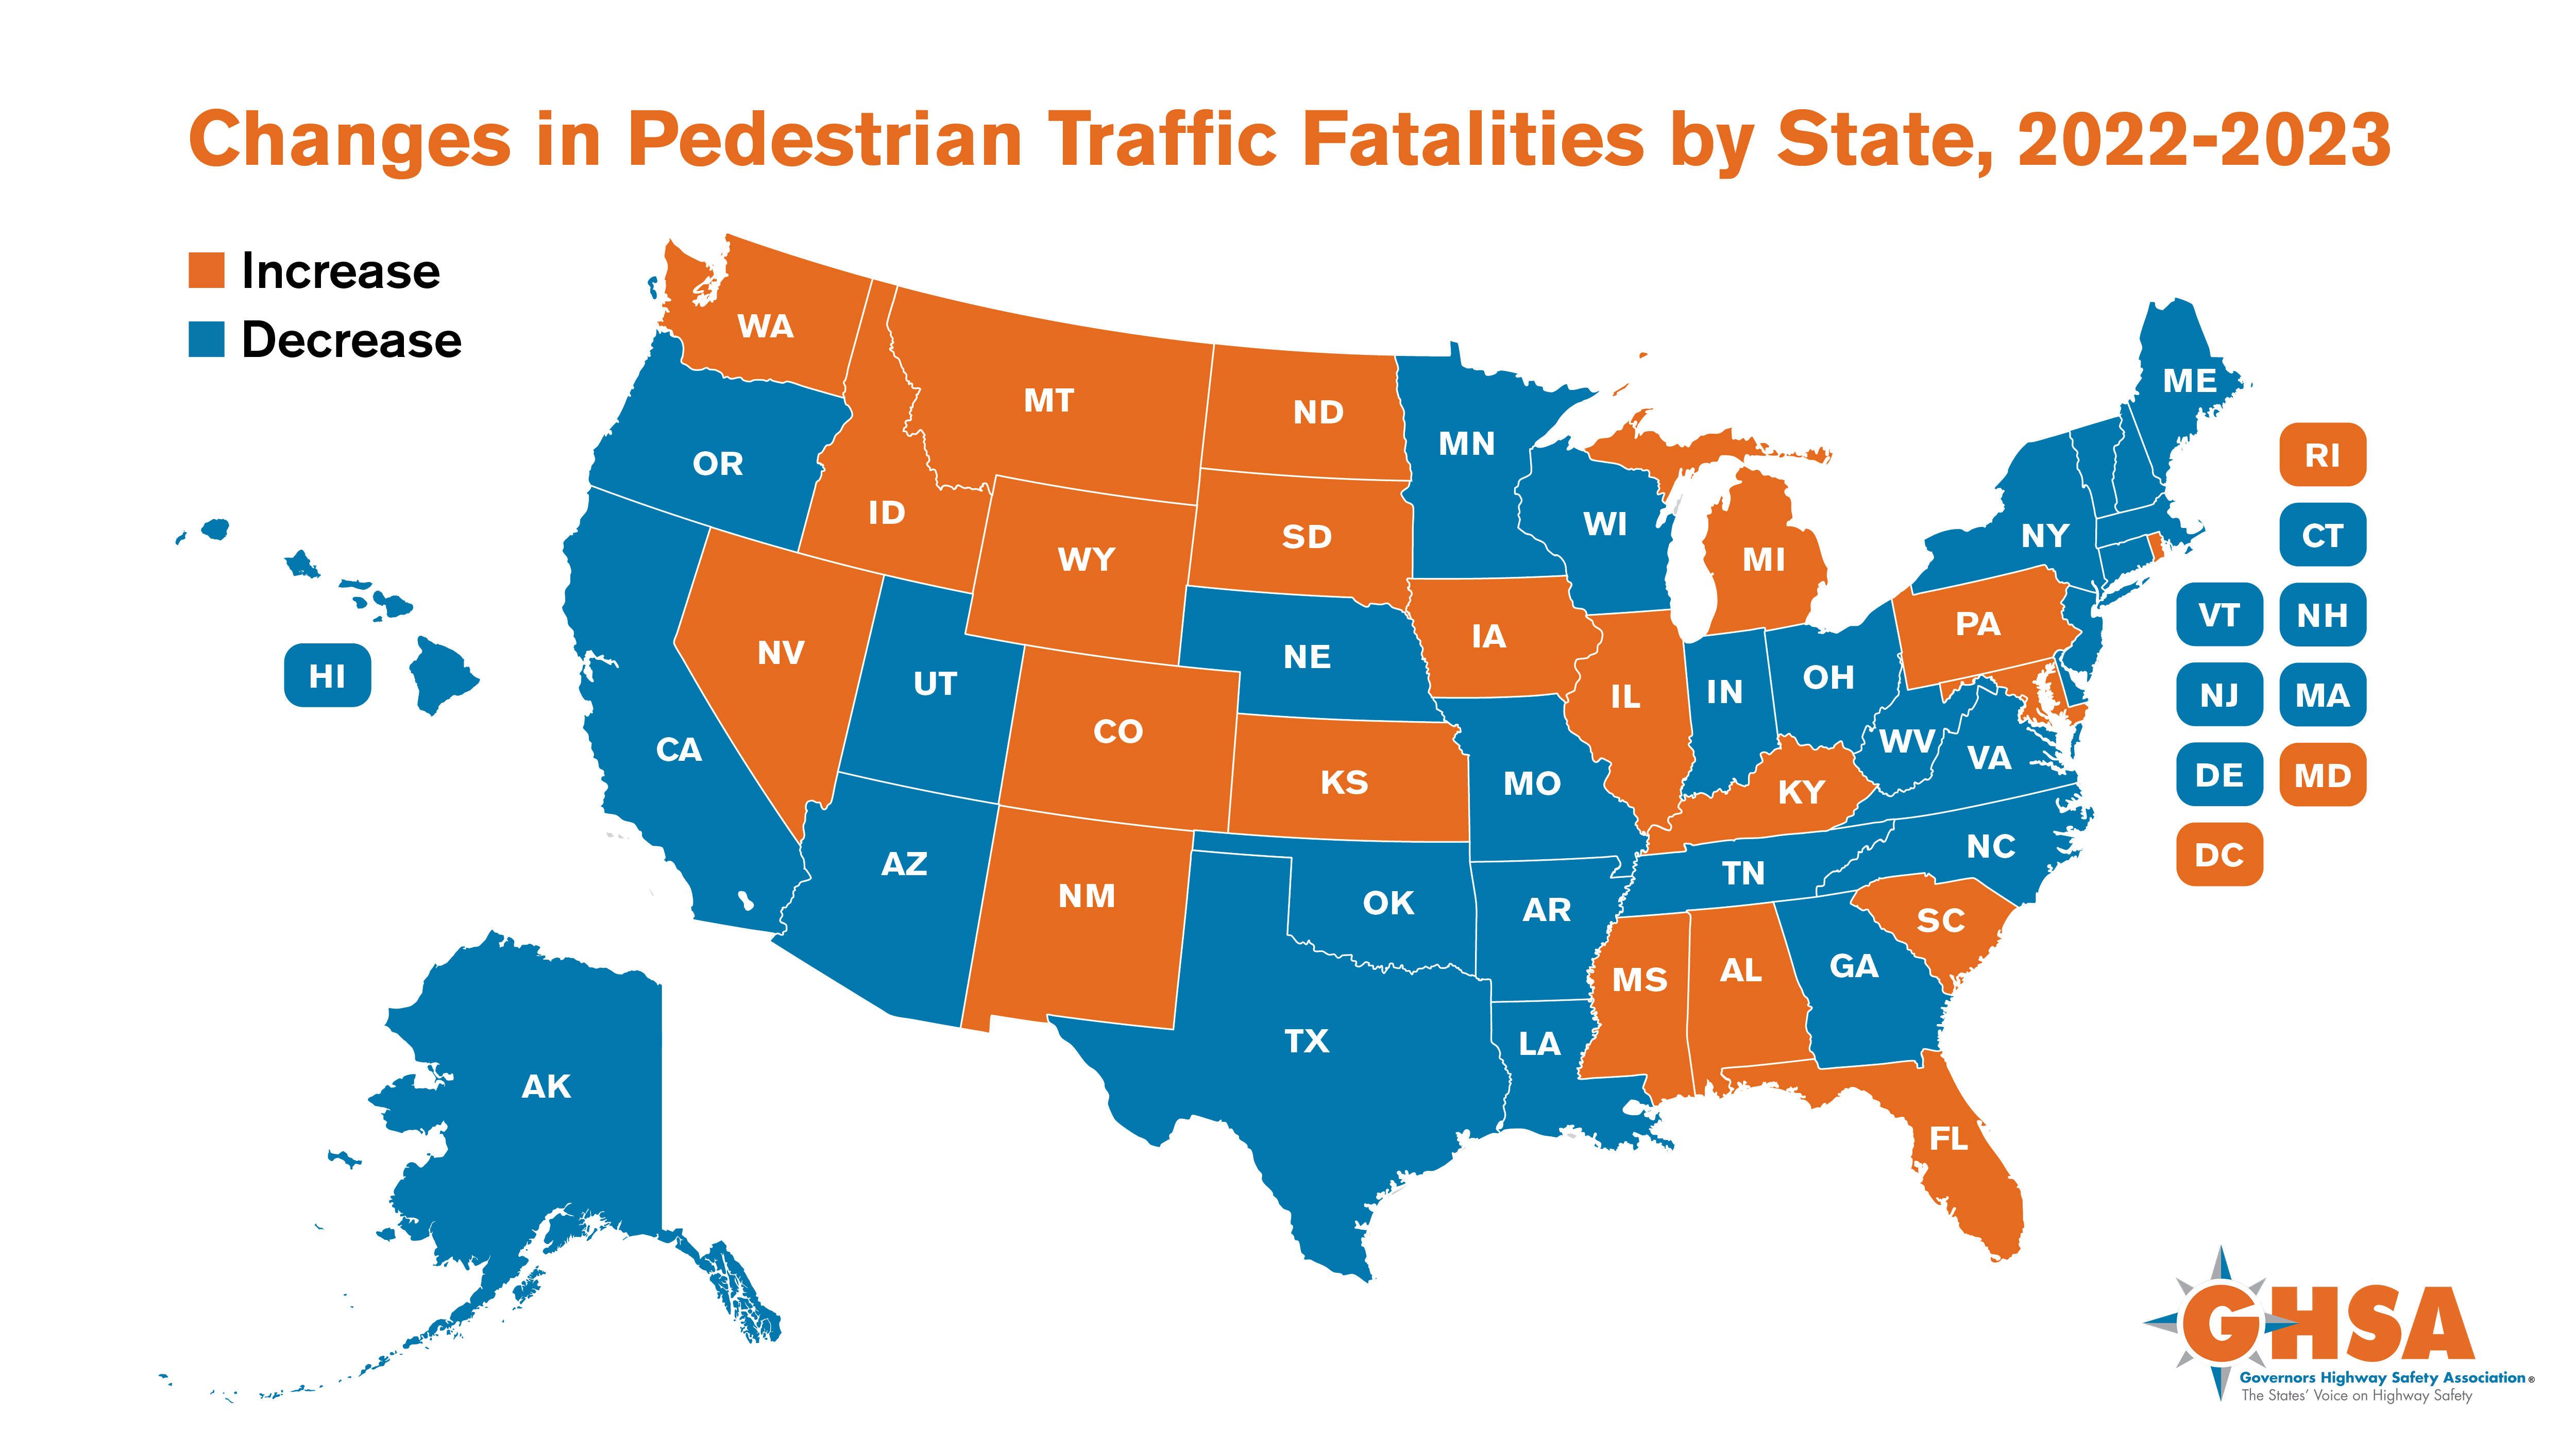 Changes in Pedestrian Traffic Fatalities by State, 2022-23